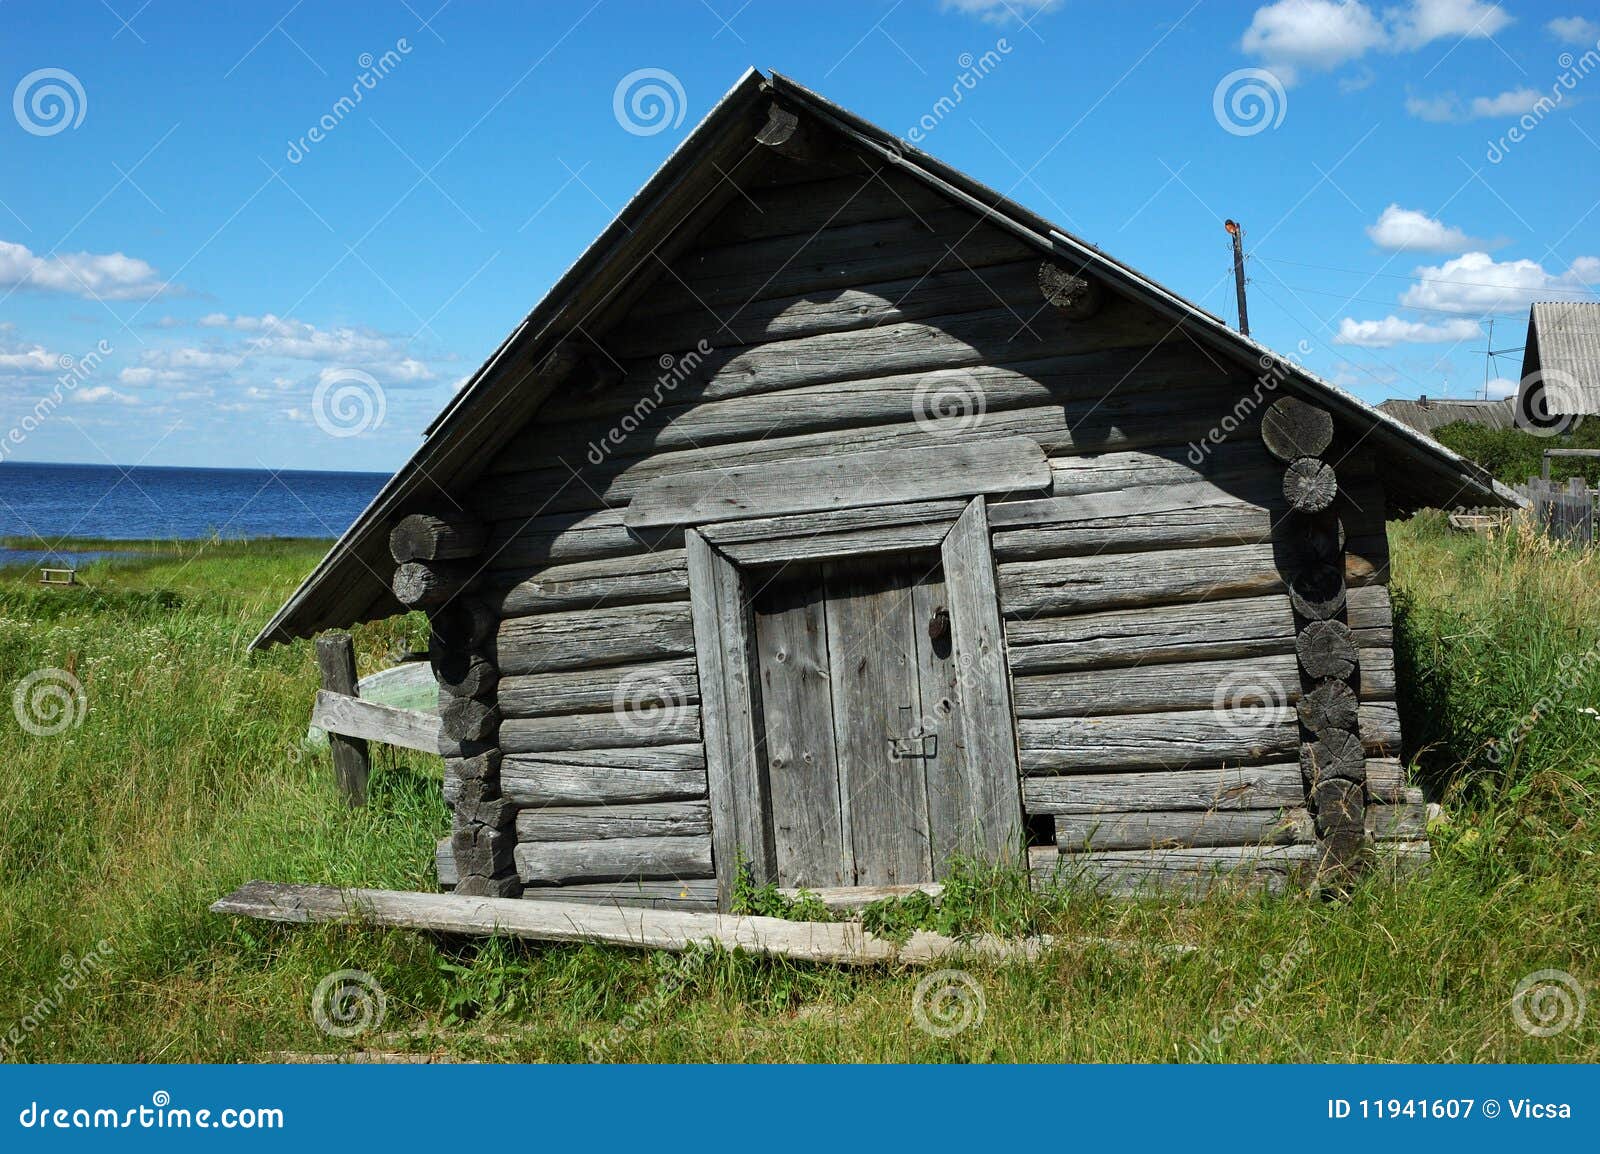 Wooden Shed On The Lake Bank Royalty Free Stock Photography - Image 